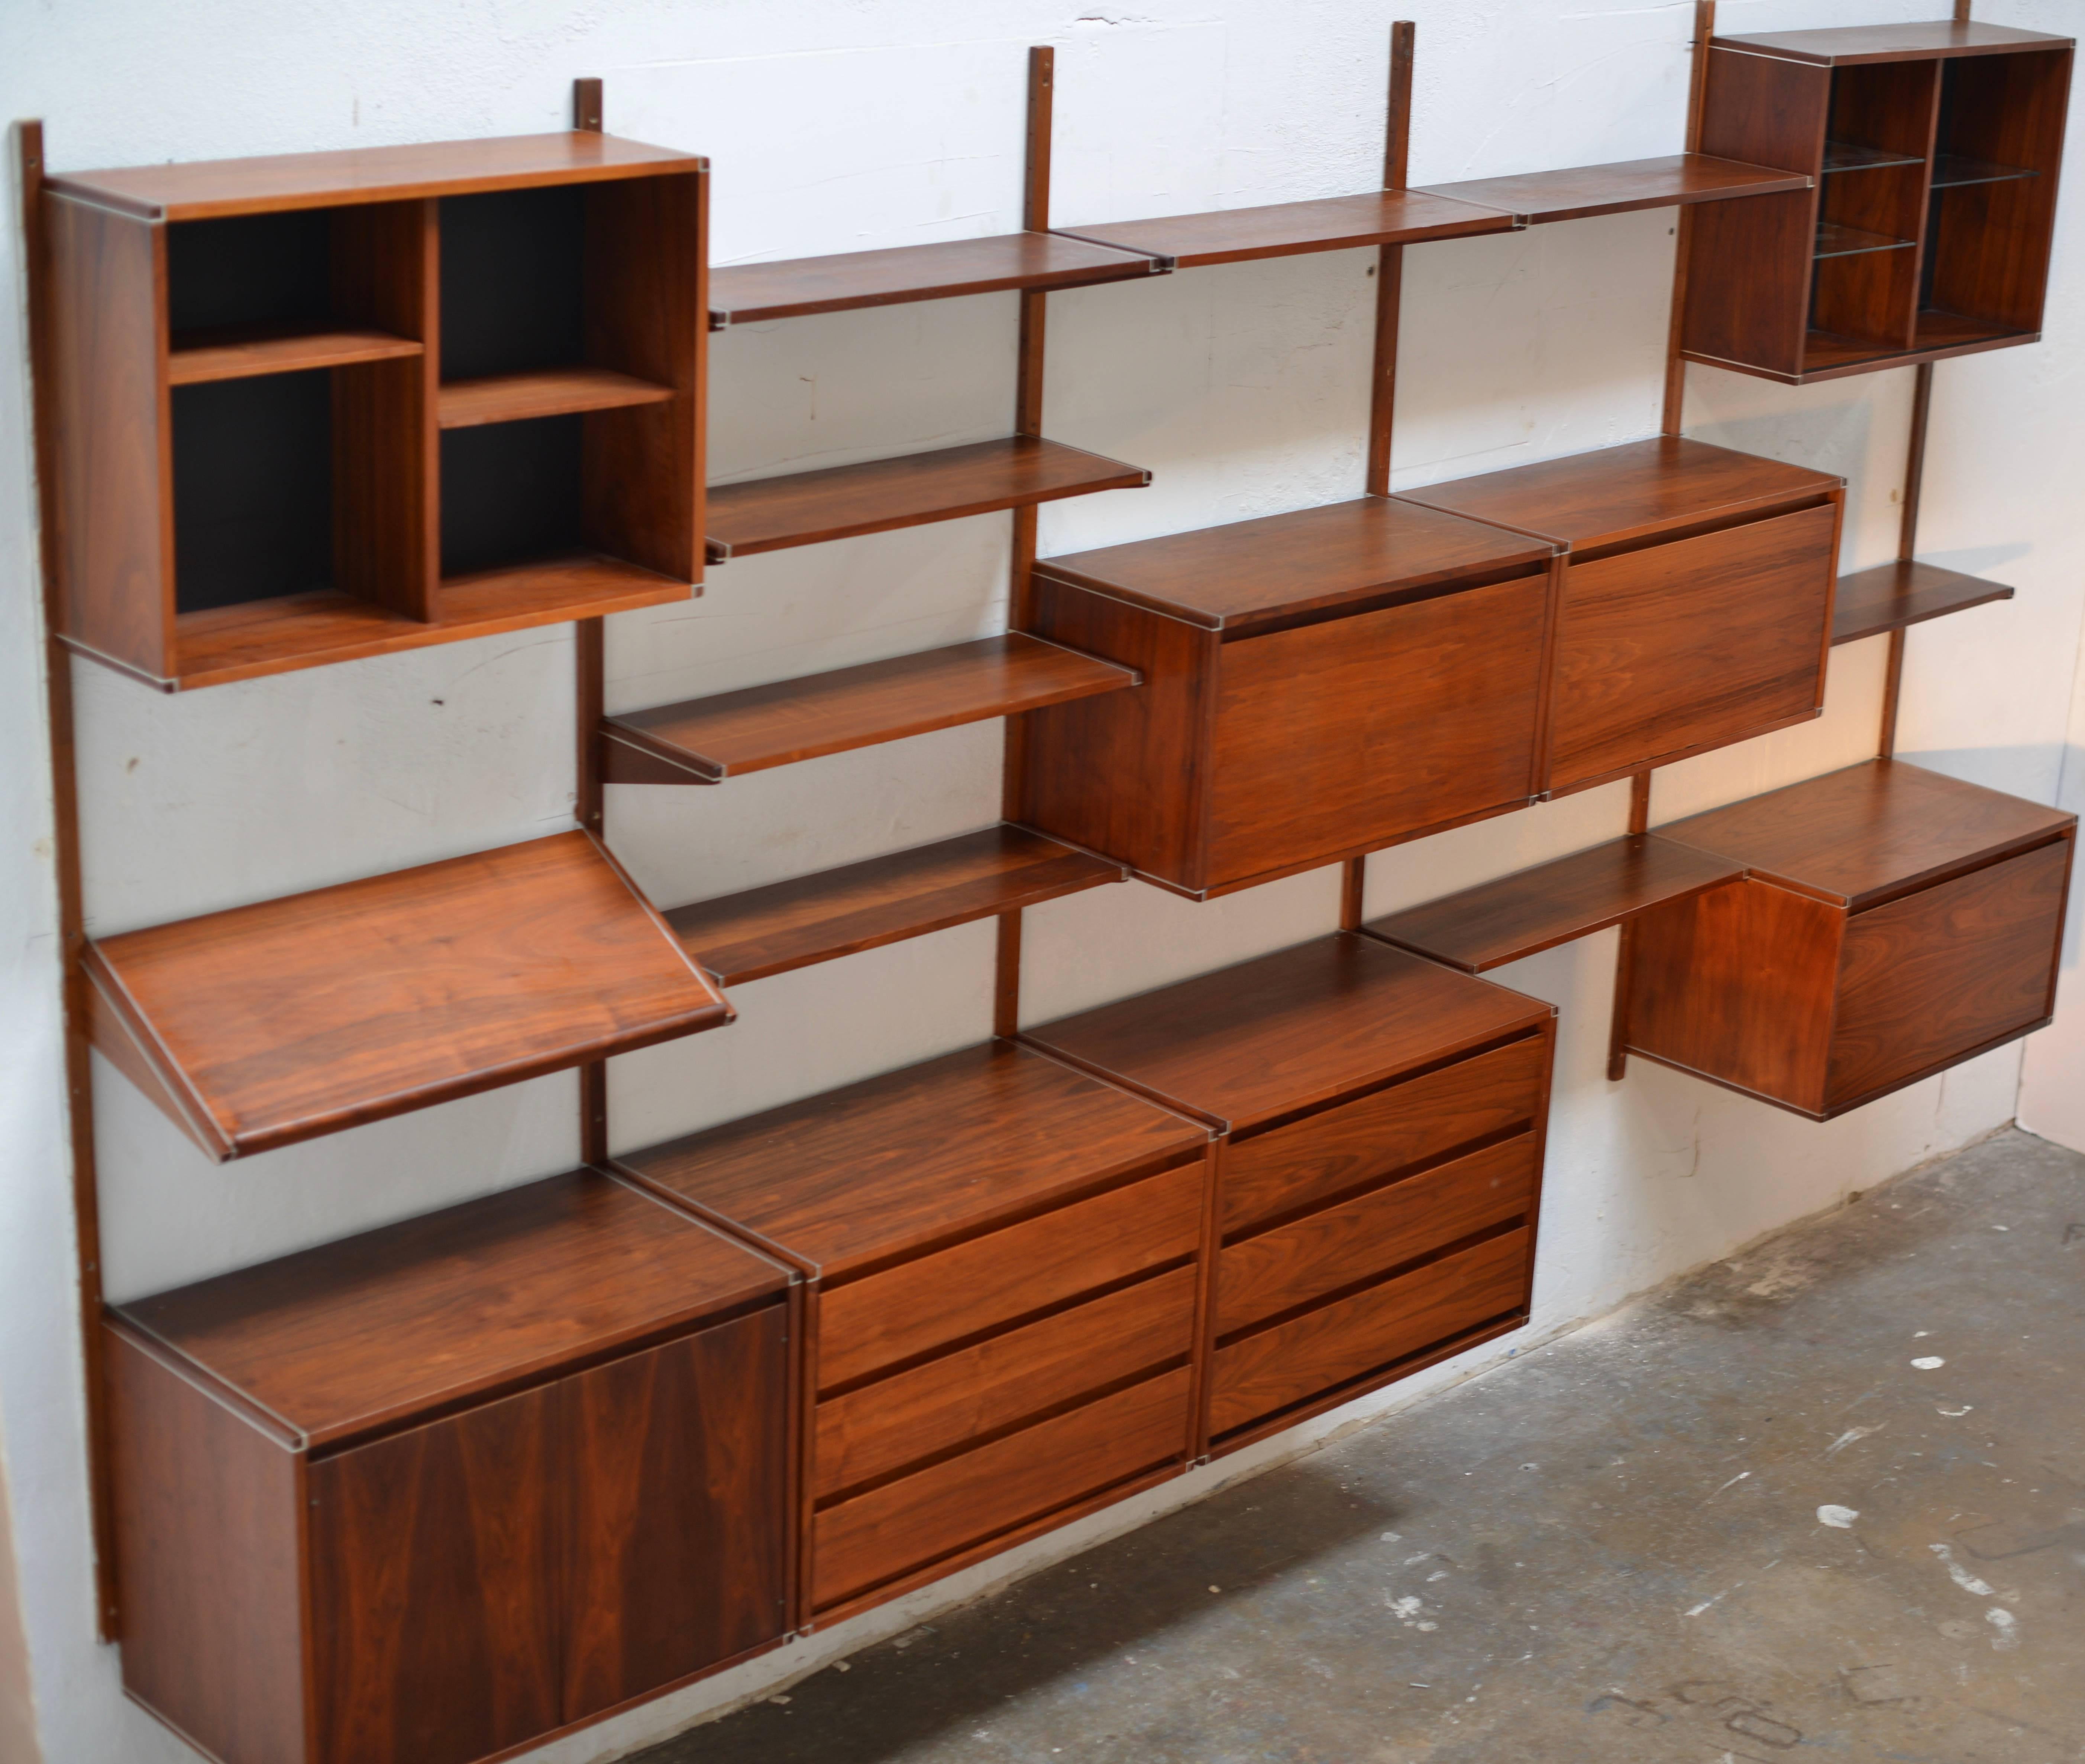 This is an amazing five bay wall unit by Barzilay of Los Angeles.
 